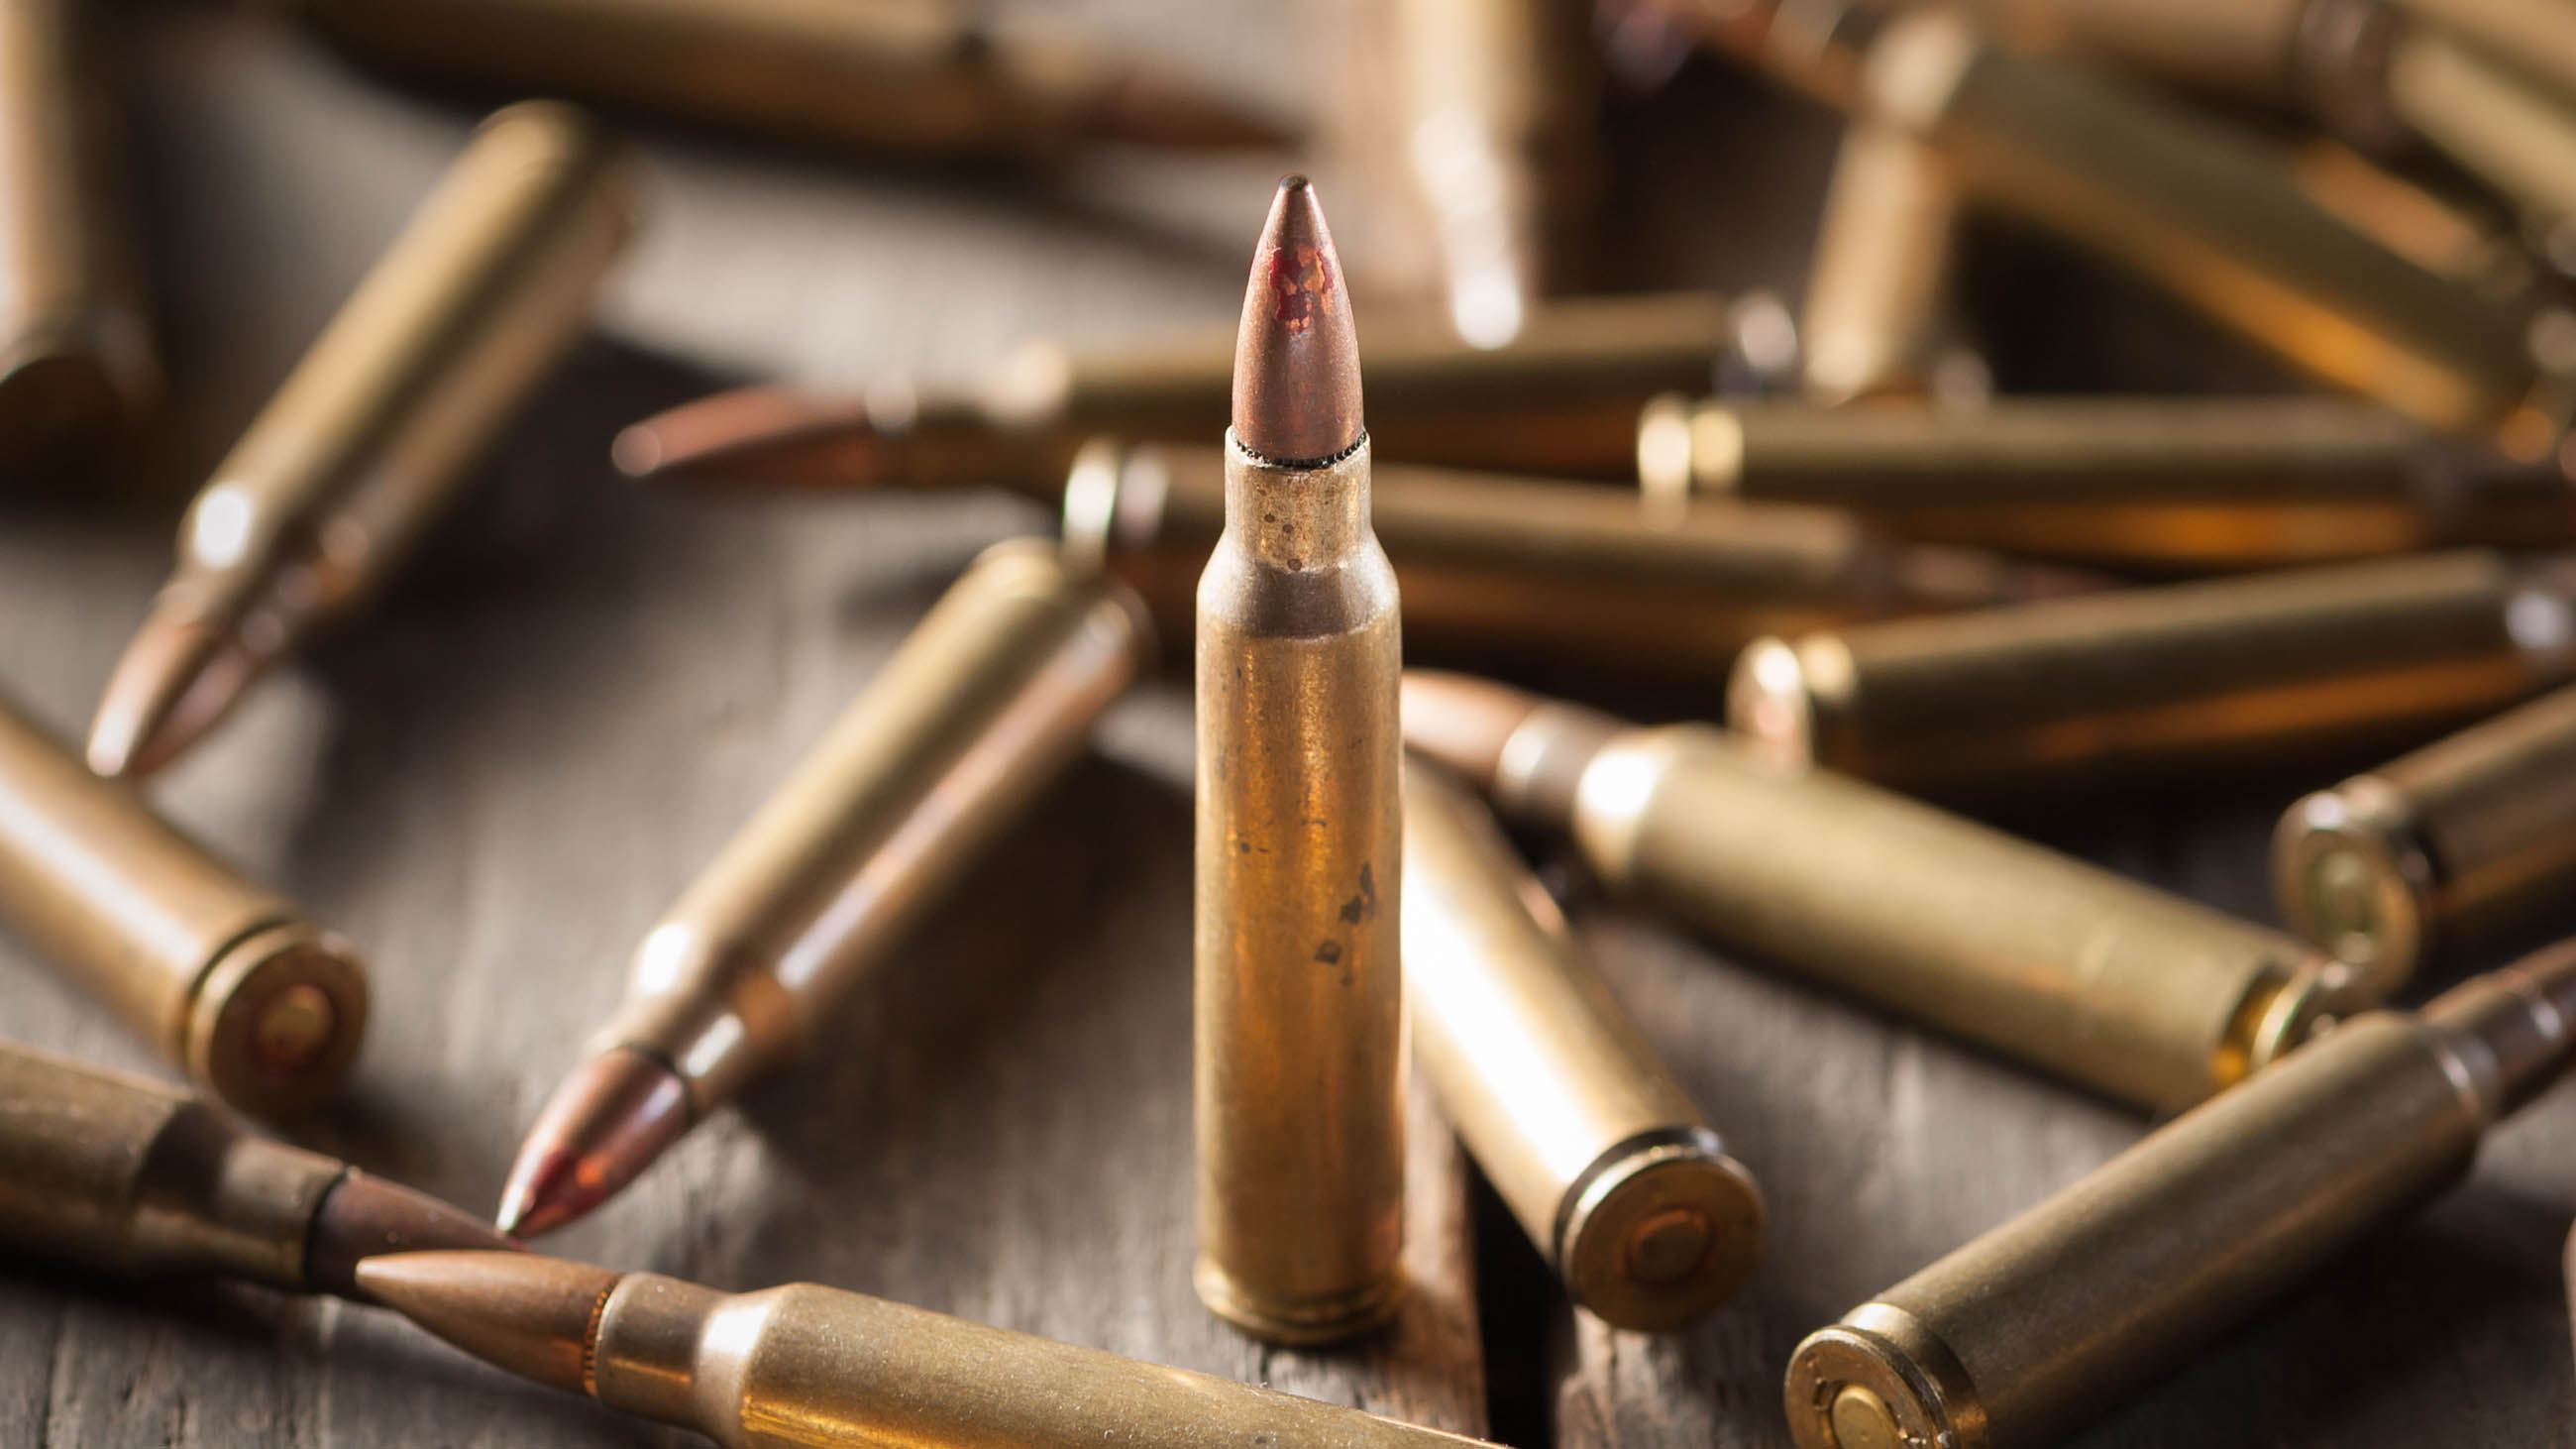 Lead Ammunition Poses Real Risks. Why Won't Gun Owners Switch?